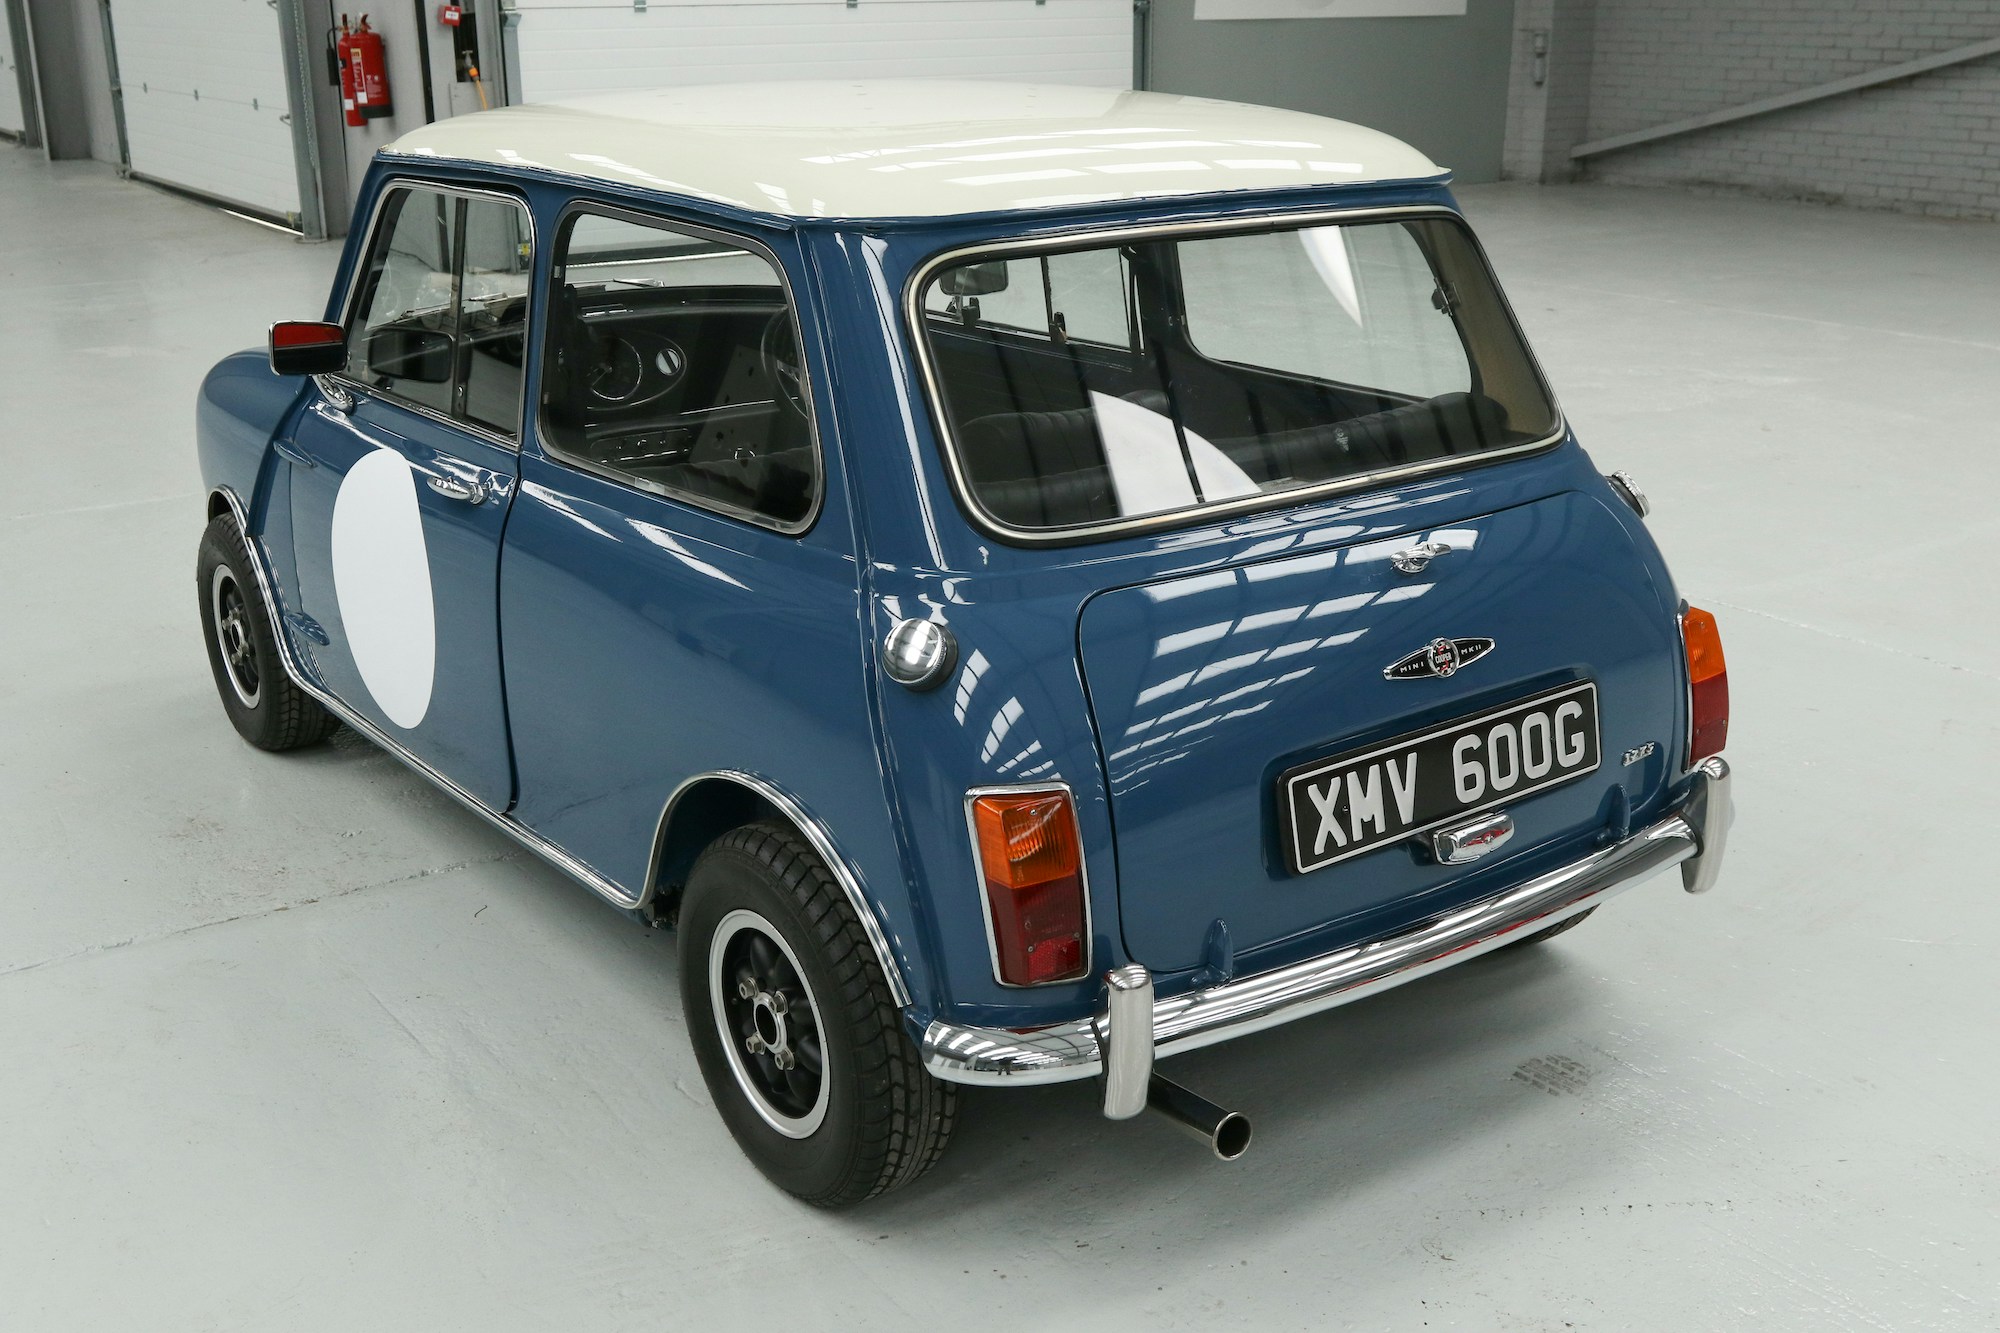 1969 AUSTIN MINI COOPER S MKII for sale by auction in Braintree, Essex ...